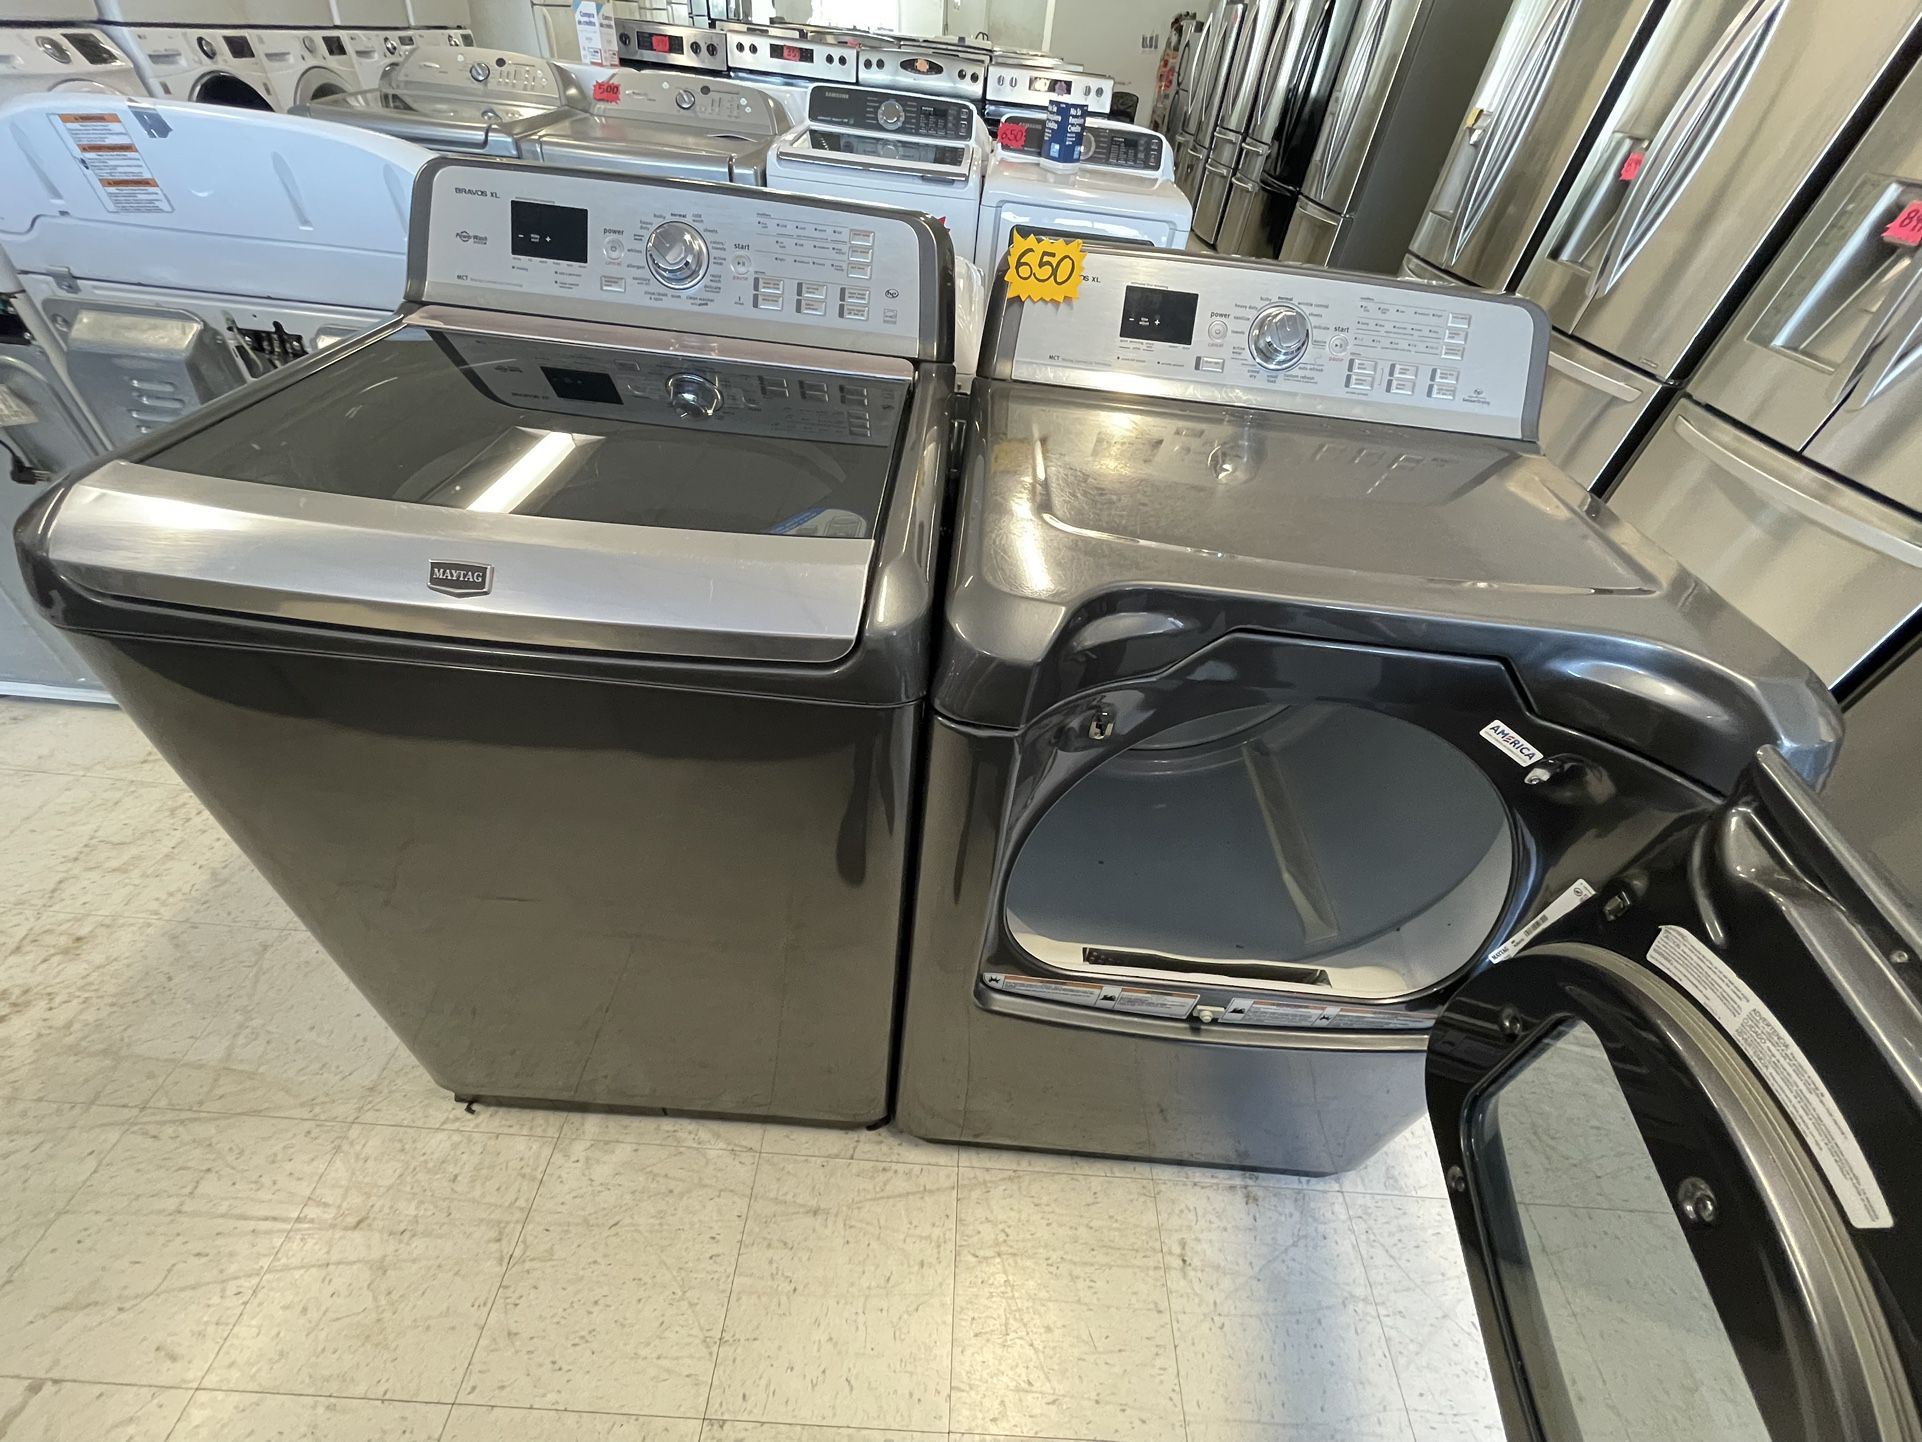 Maytag Tap Load Washer And Electric Dryer Set Used Good Condition With 90days Warranty 